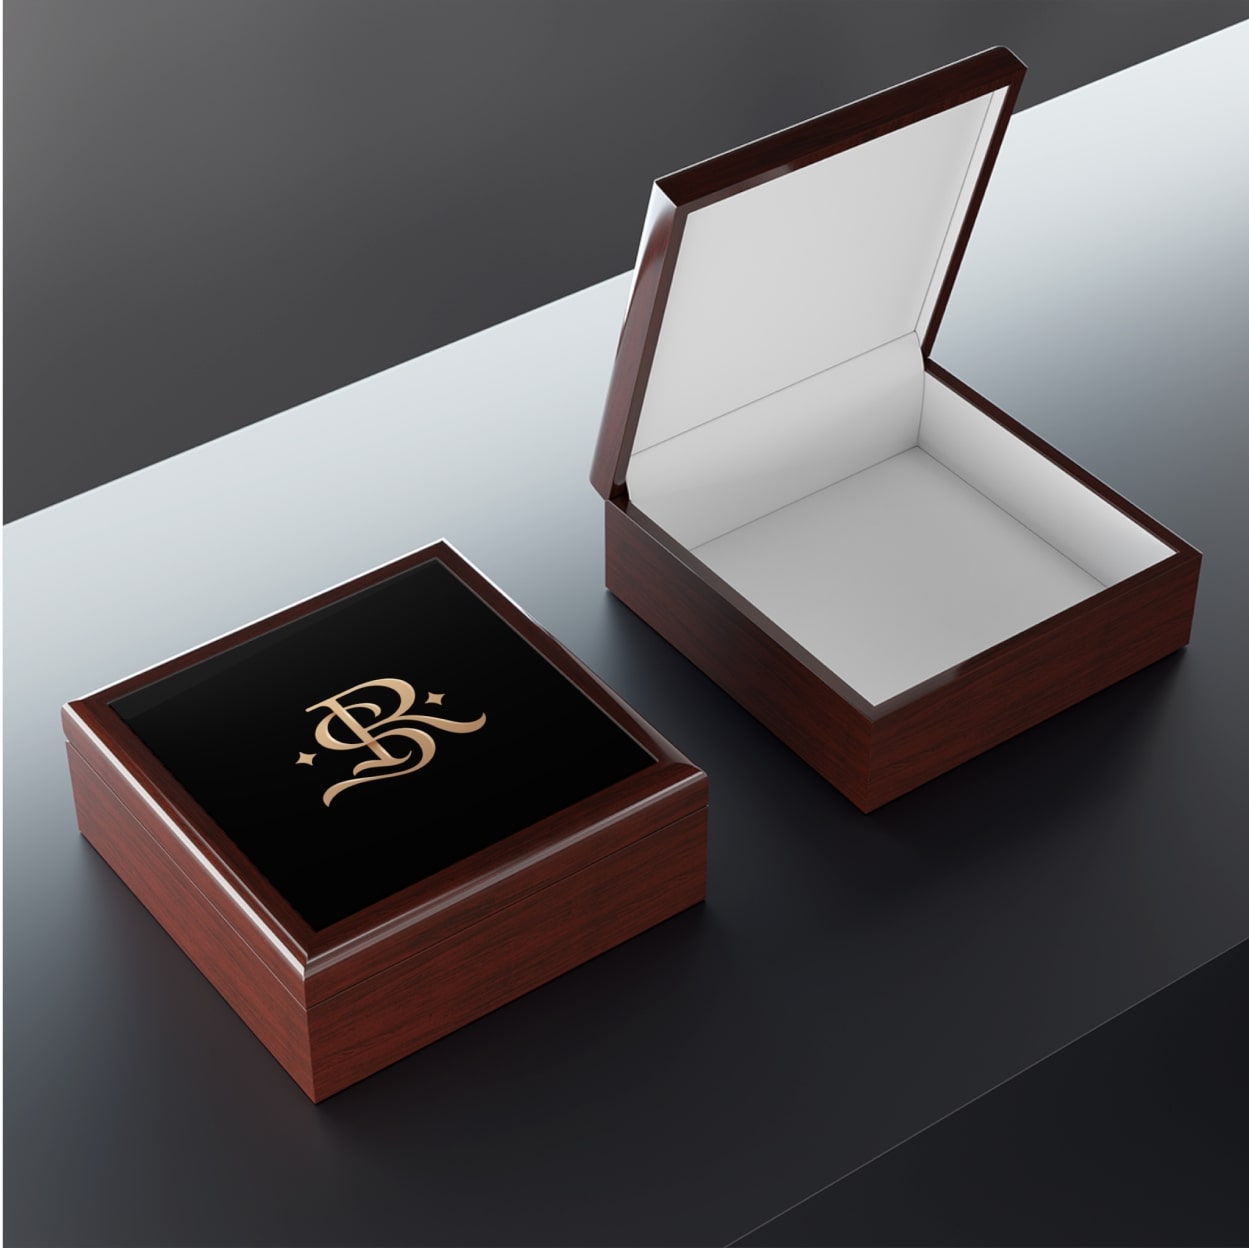 A mockup of a personalized jewelry box with a signature on top.